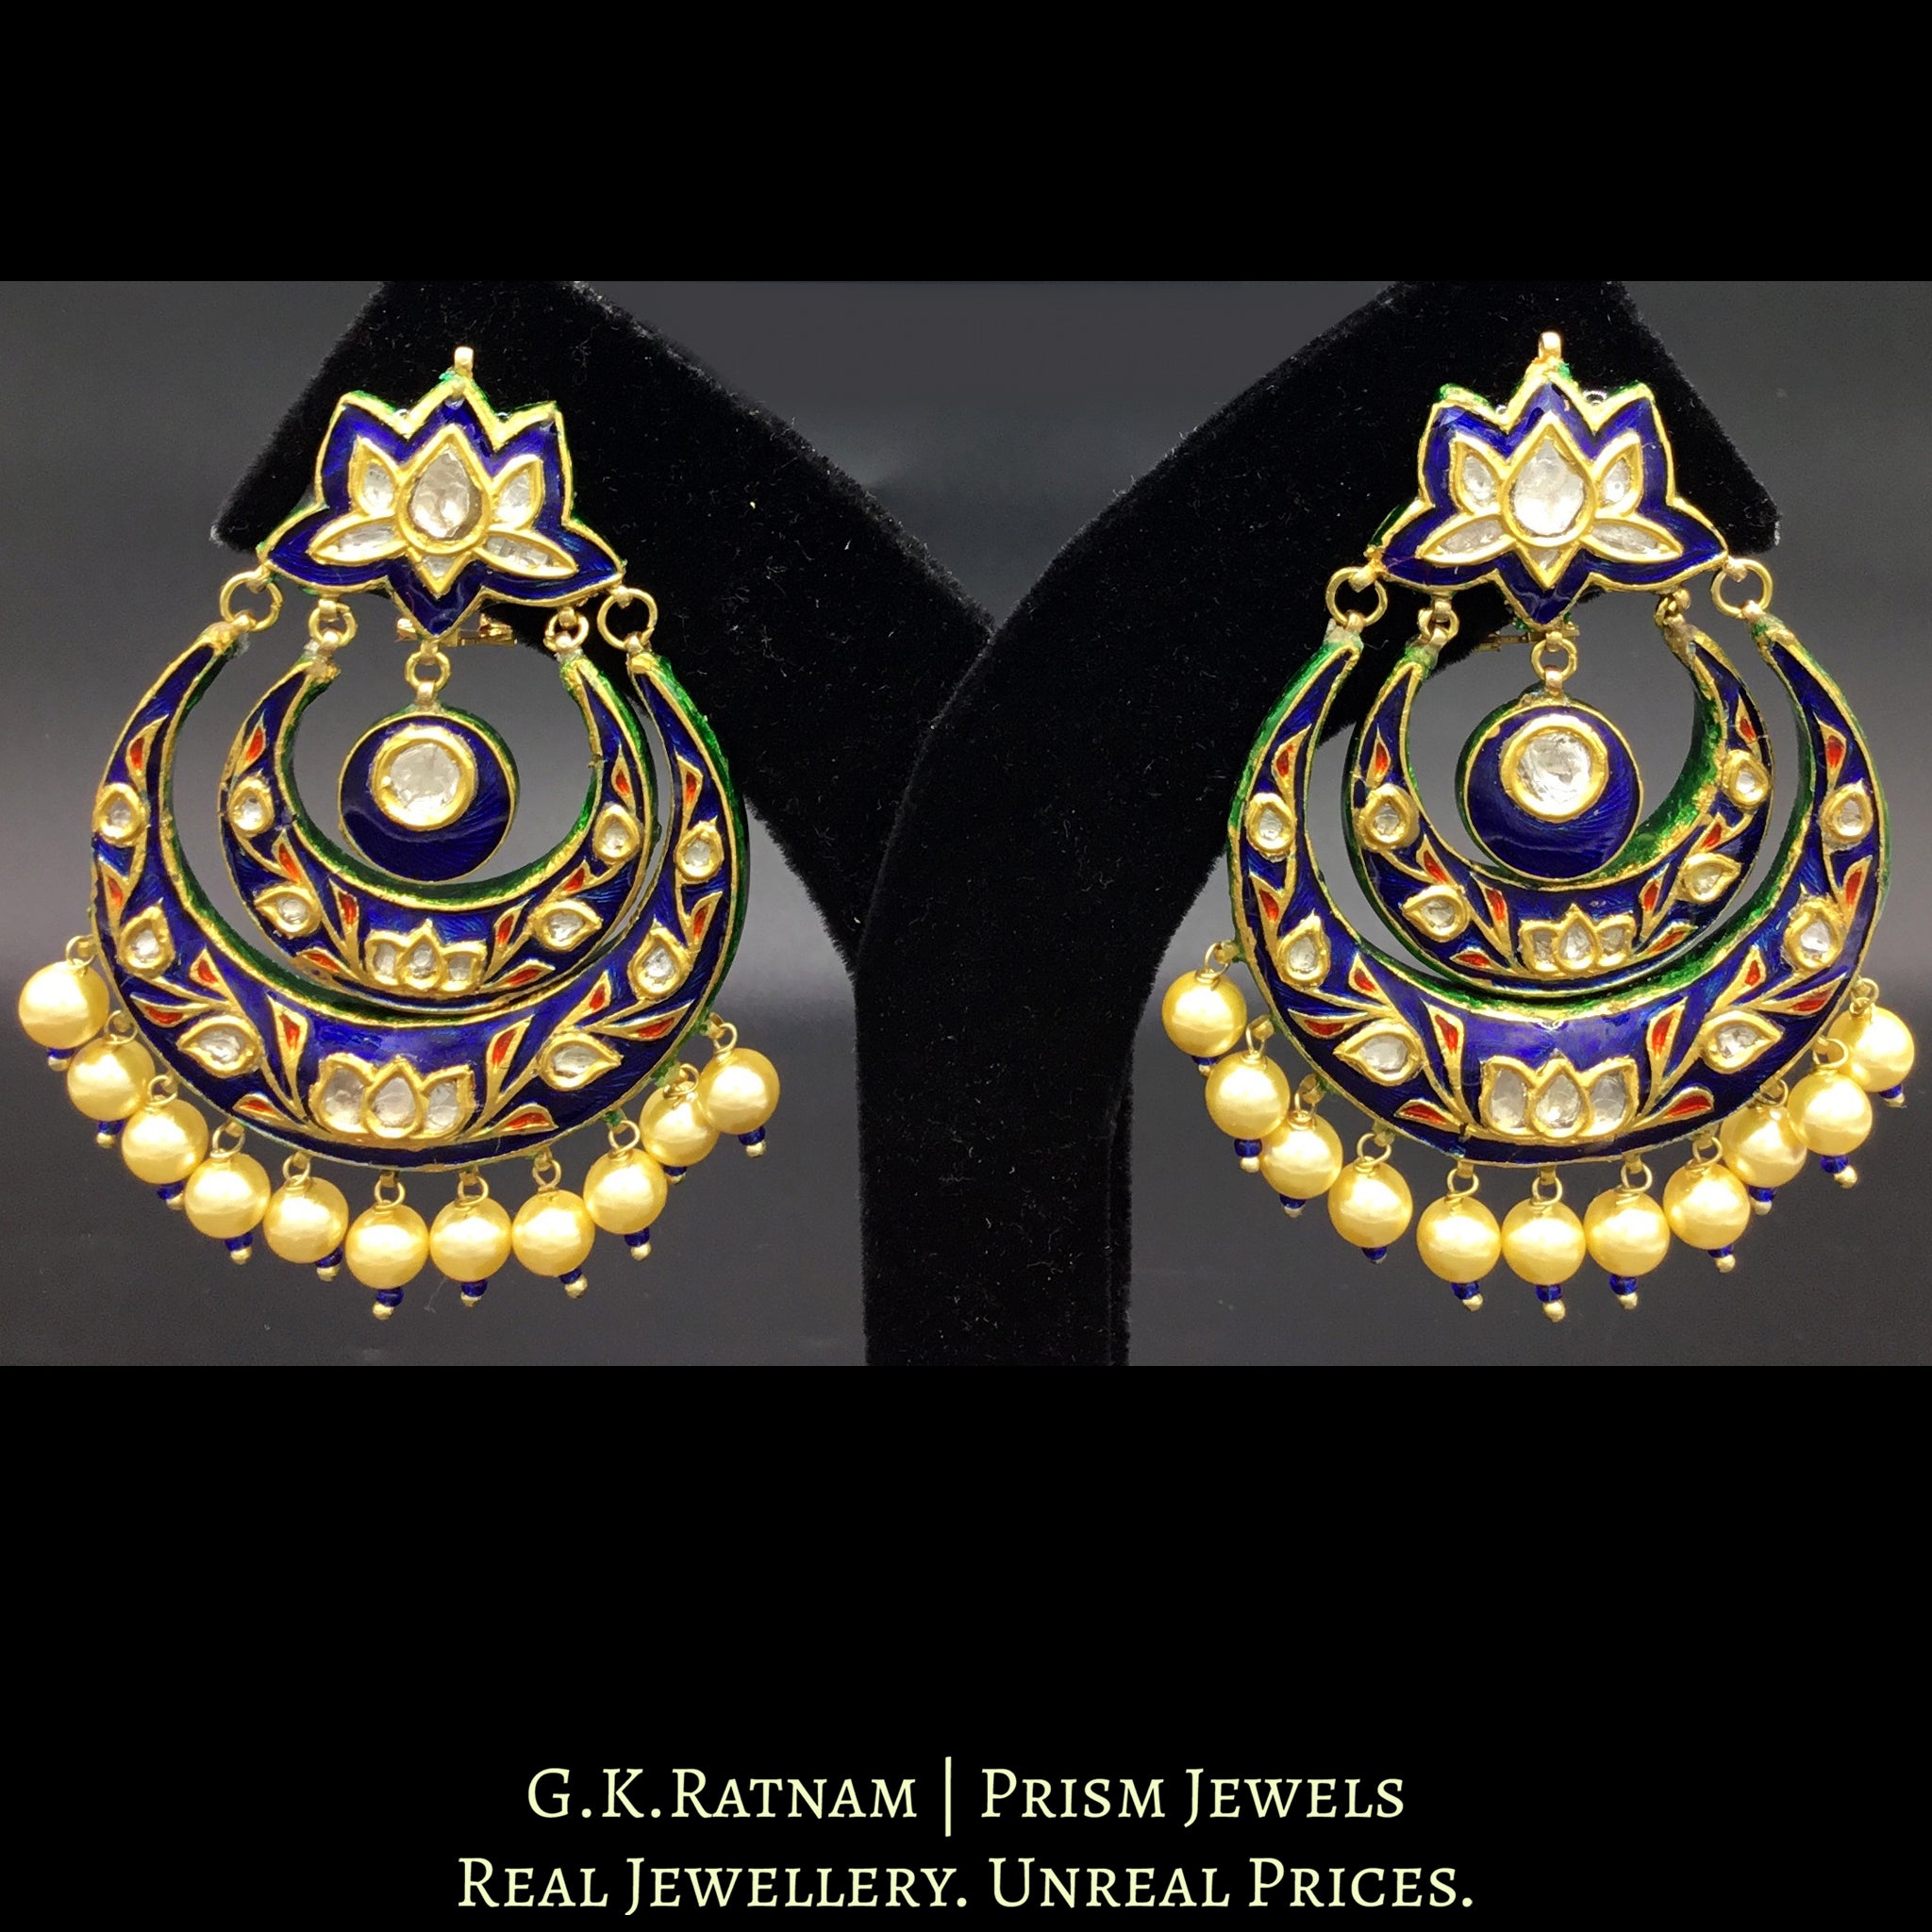 23k Gold and Diamond Polki Chand Bali Earring Pair with royal blue enamelling